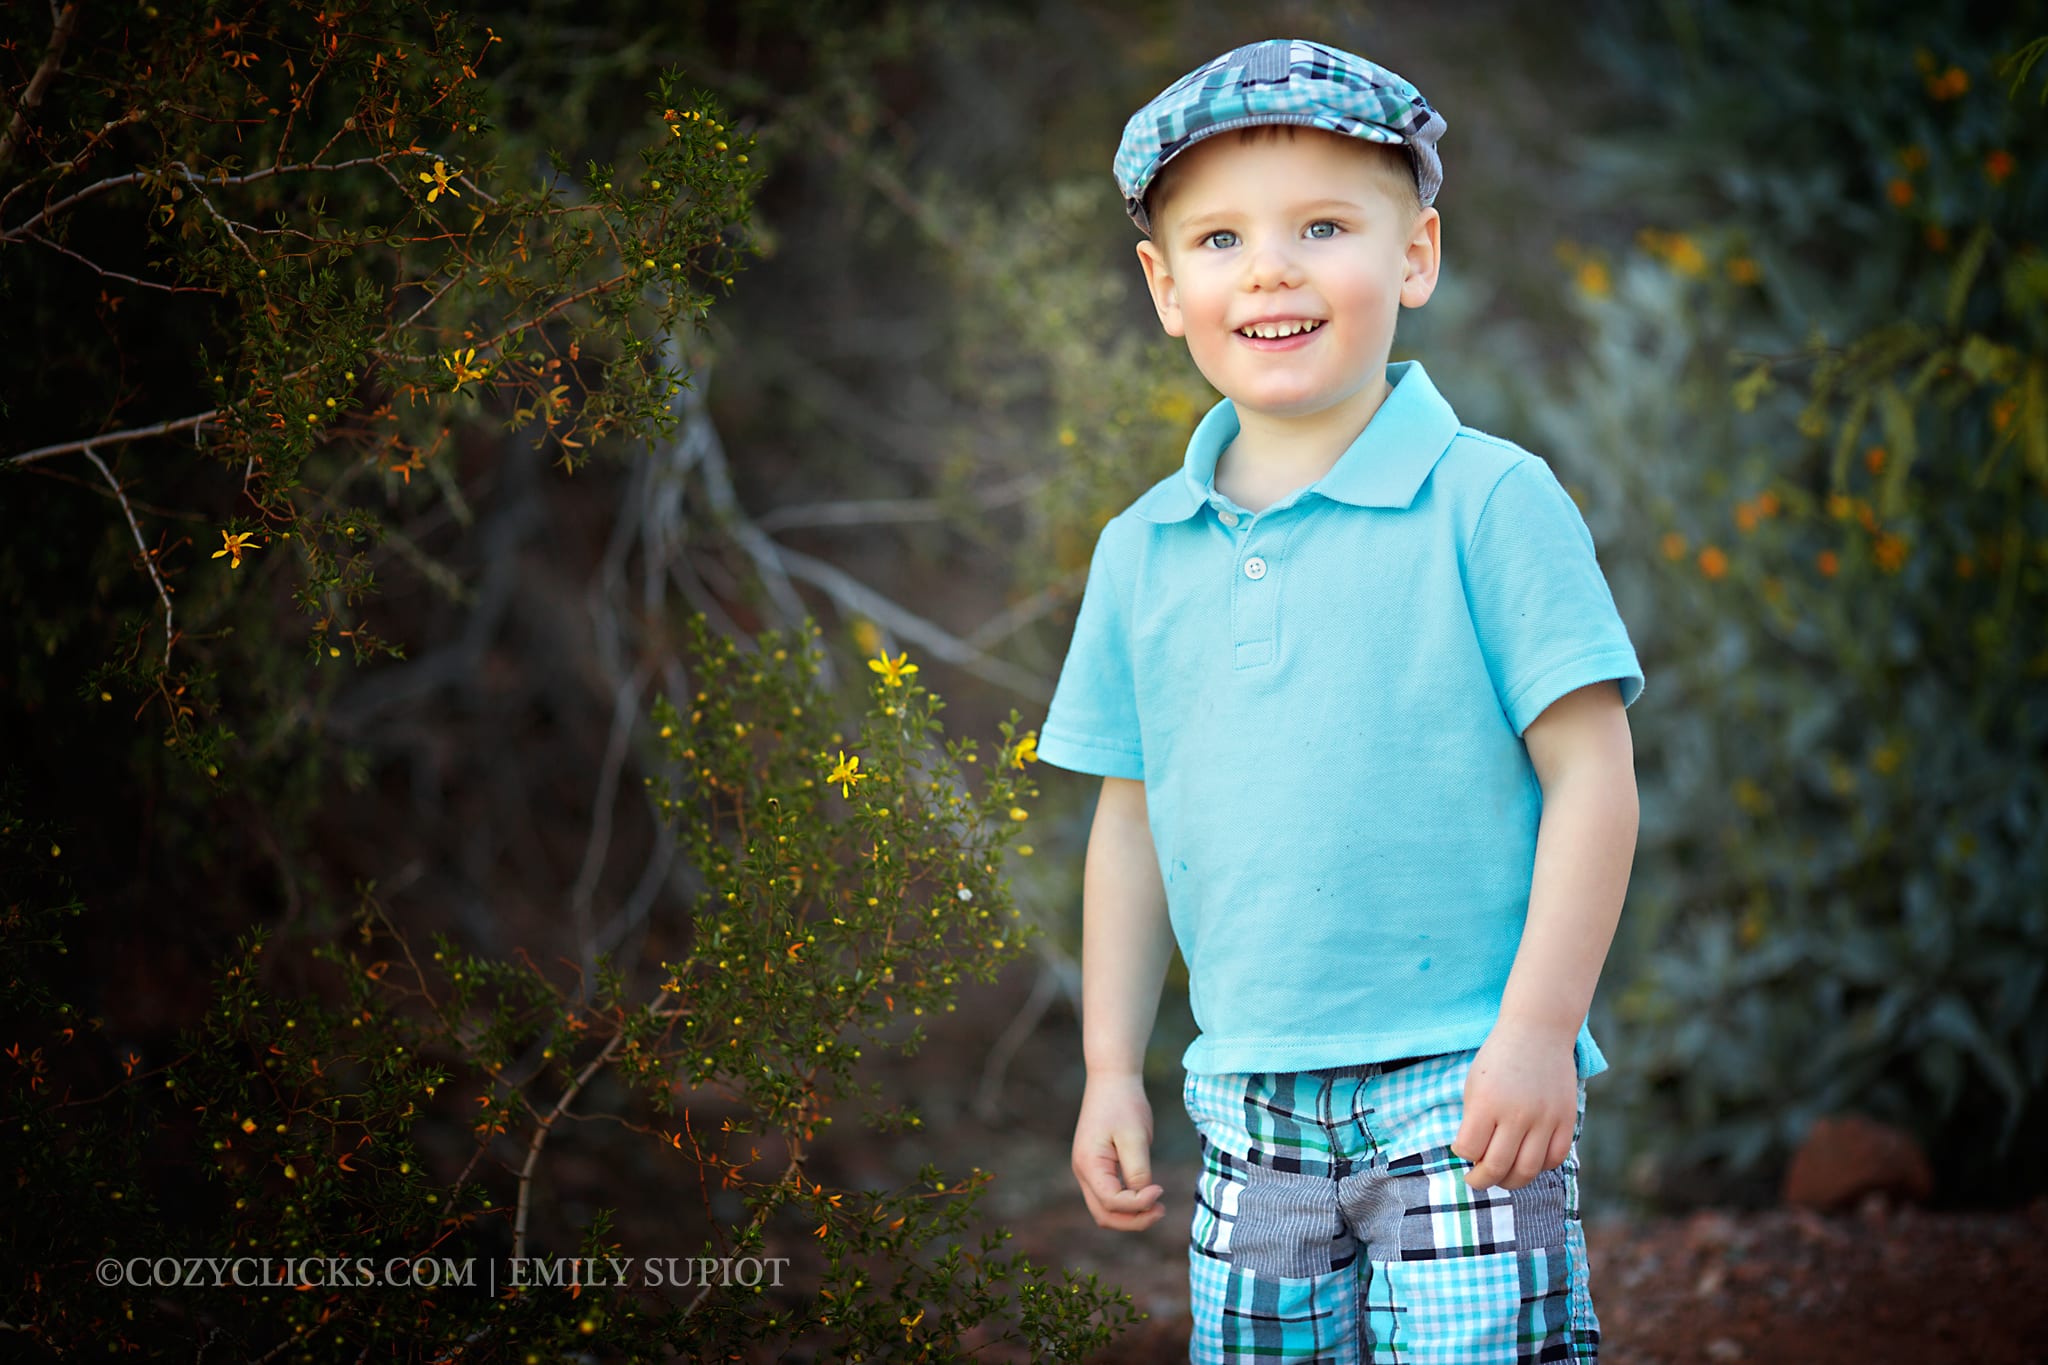 Child photo of two year old boy smiling big with a cute golfers cap on